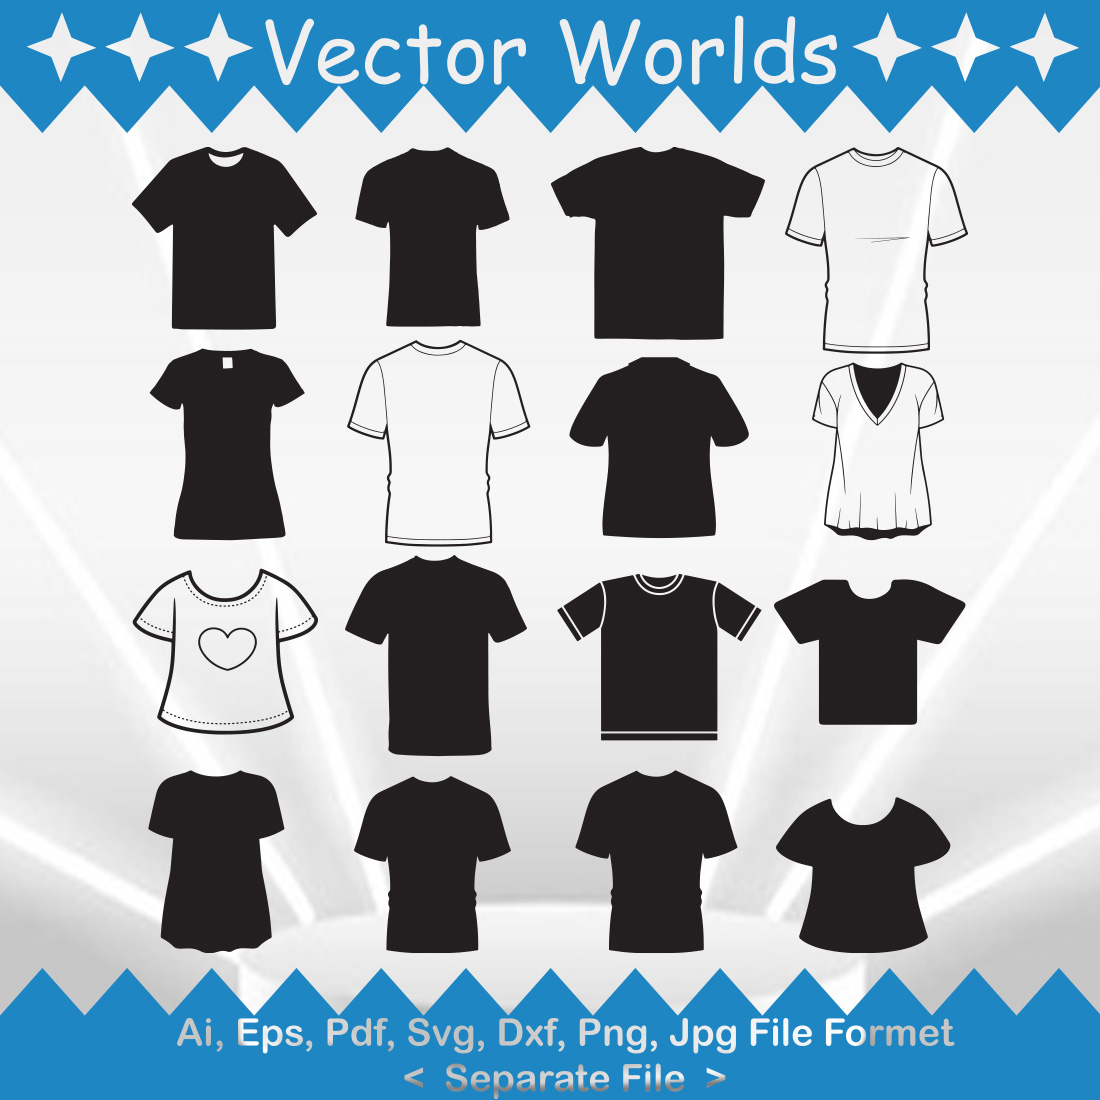 Collection of vector marvelous images of short sleeve t-shirt silhouettes.